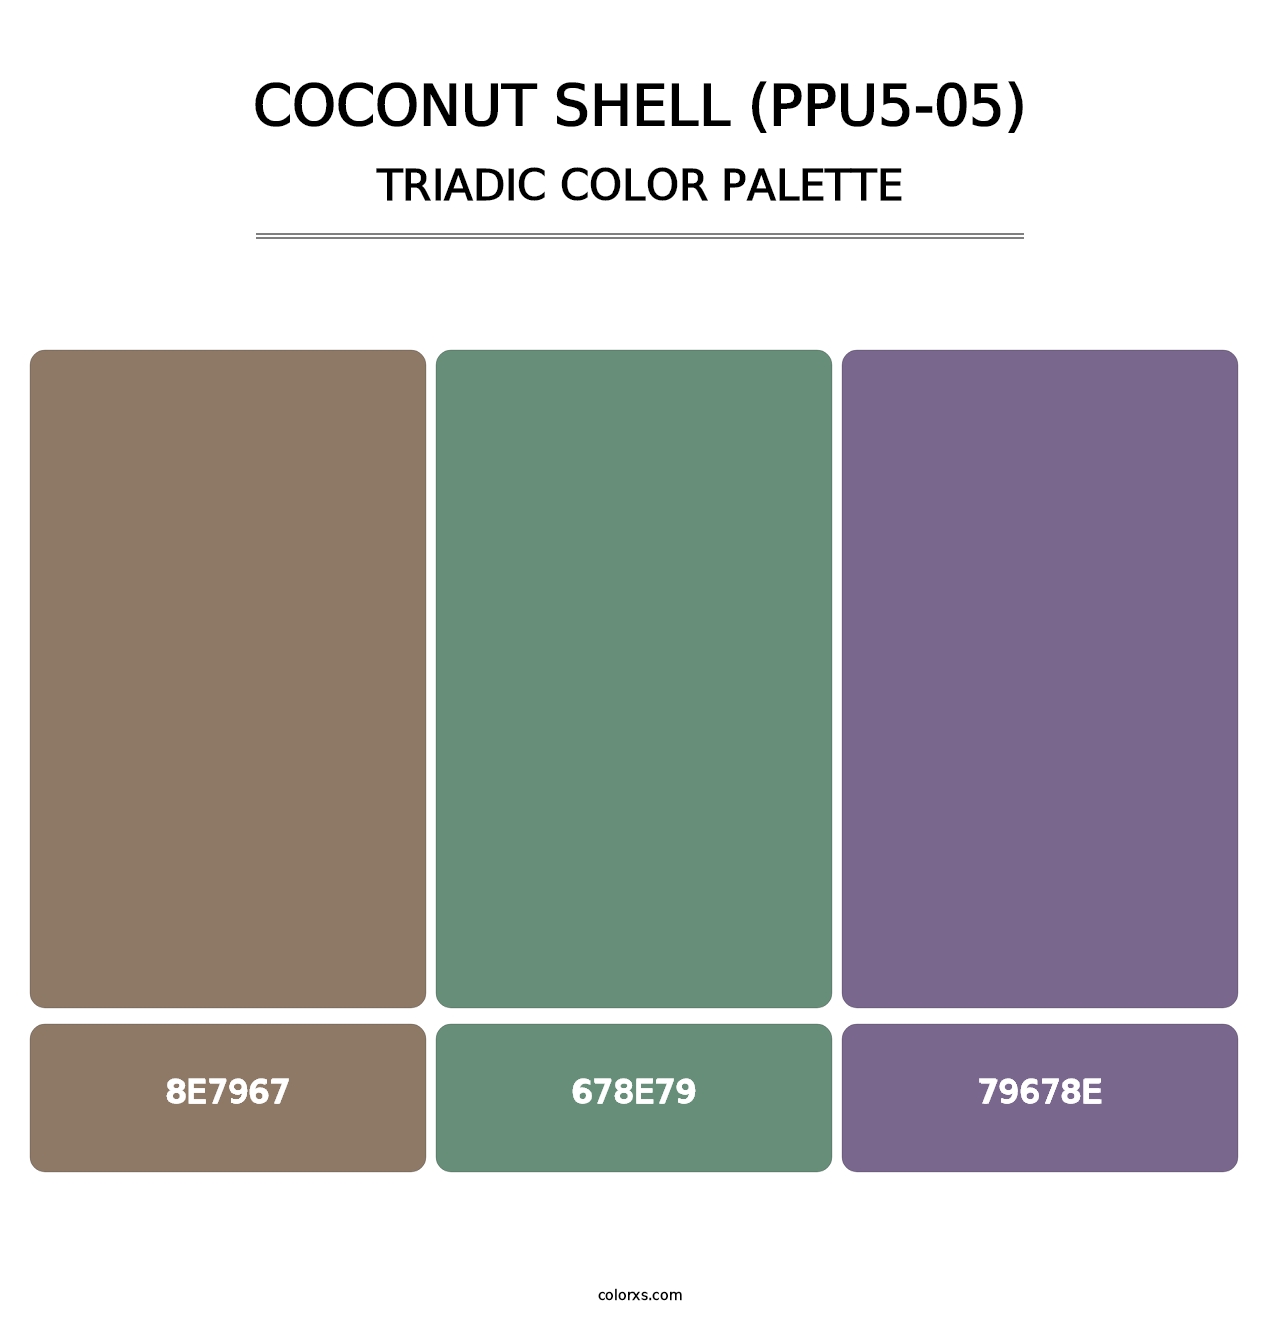 Coconut Shell (PPU5-05) - Triadic Color Palette